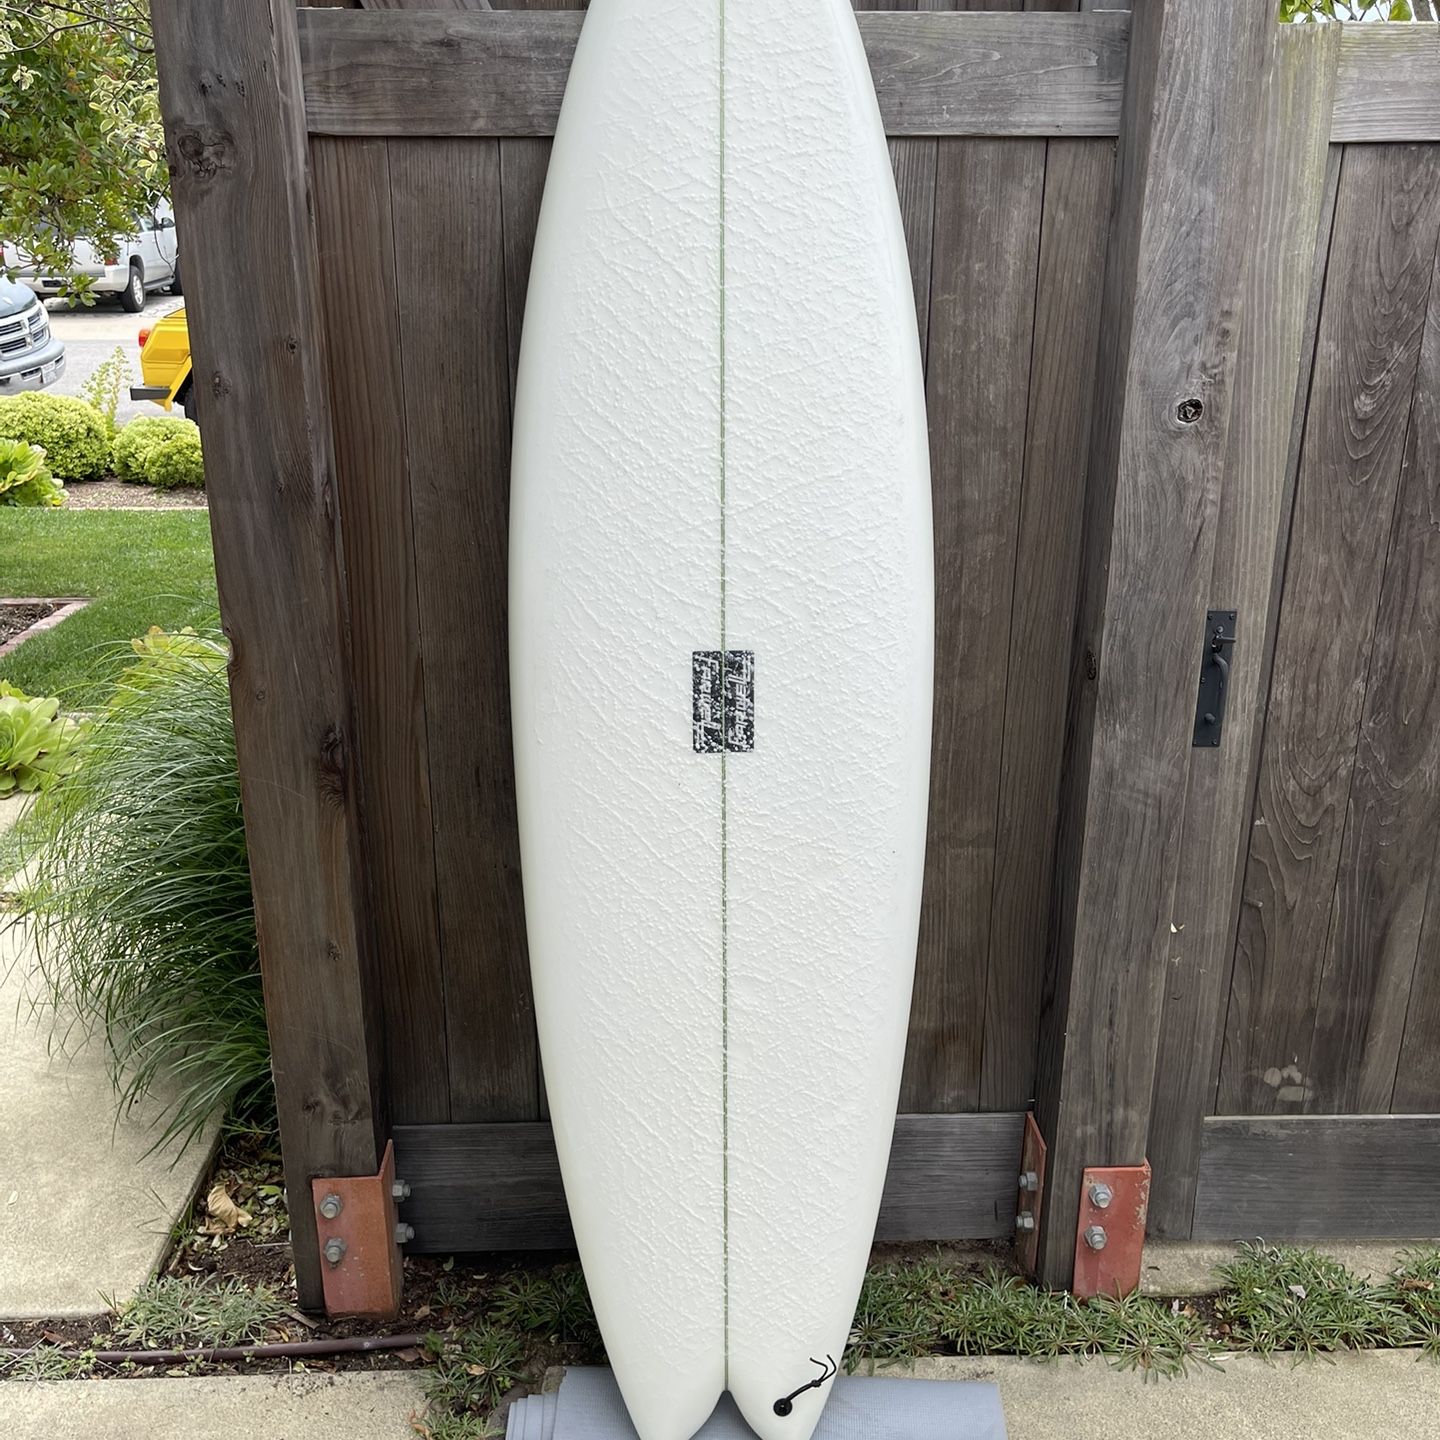 Mid Length, Quad fin, Swallow tail Surfboard